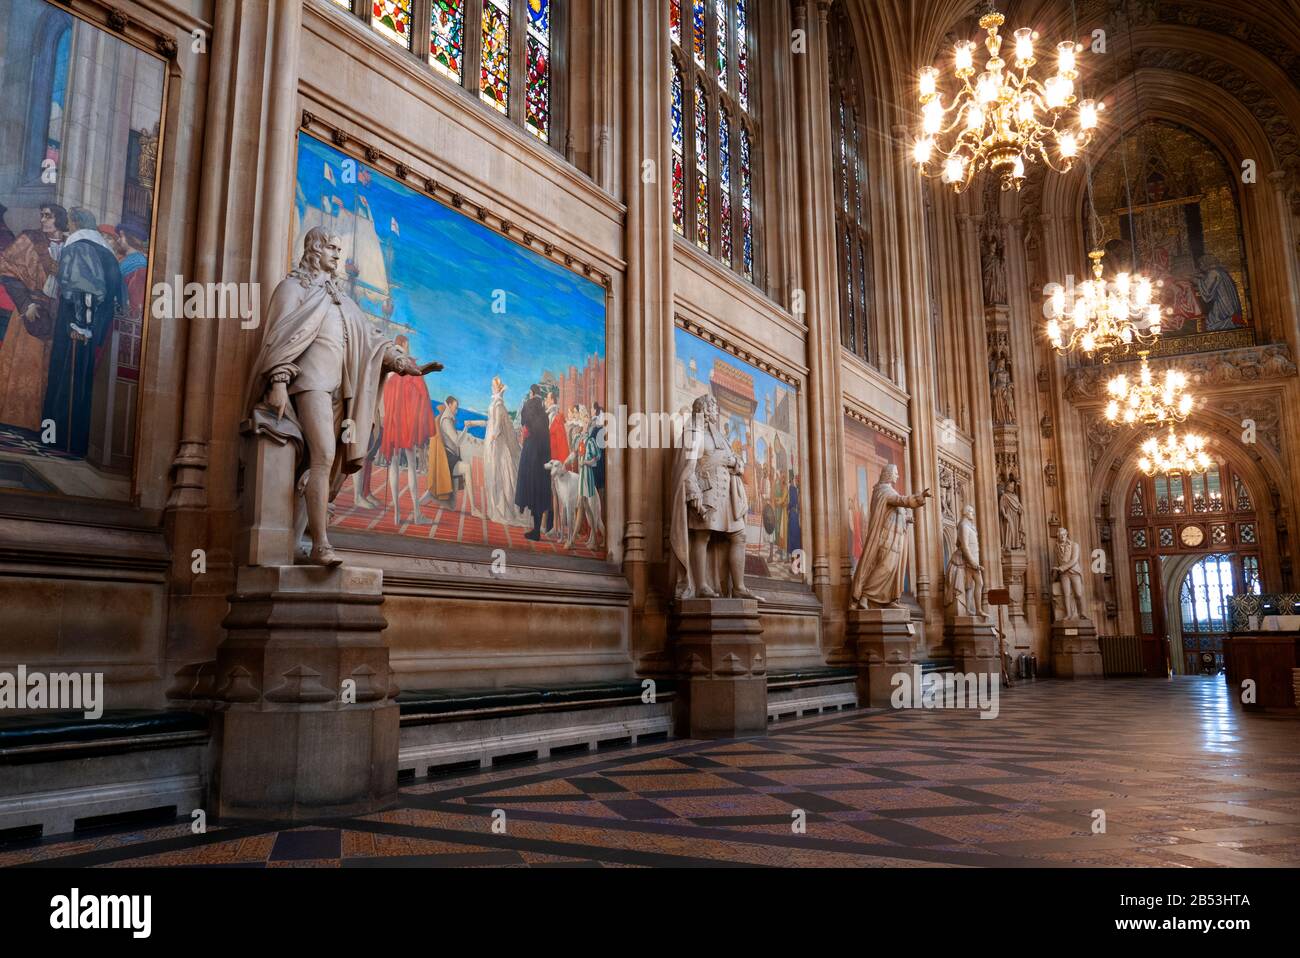 St Stephen's Hall with statue of John Selden in foreground, Palace of Westminster, London, United Kingdom Stock Photo